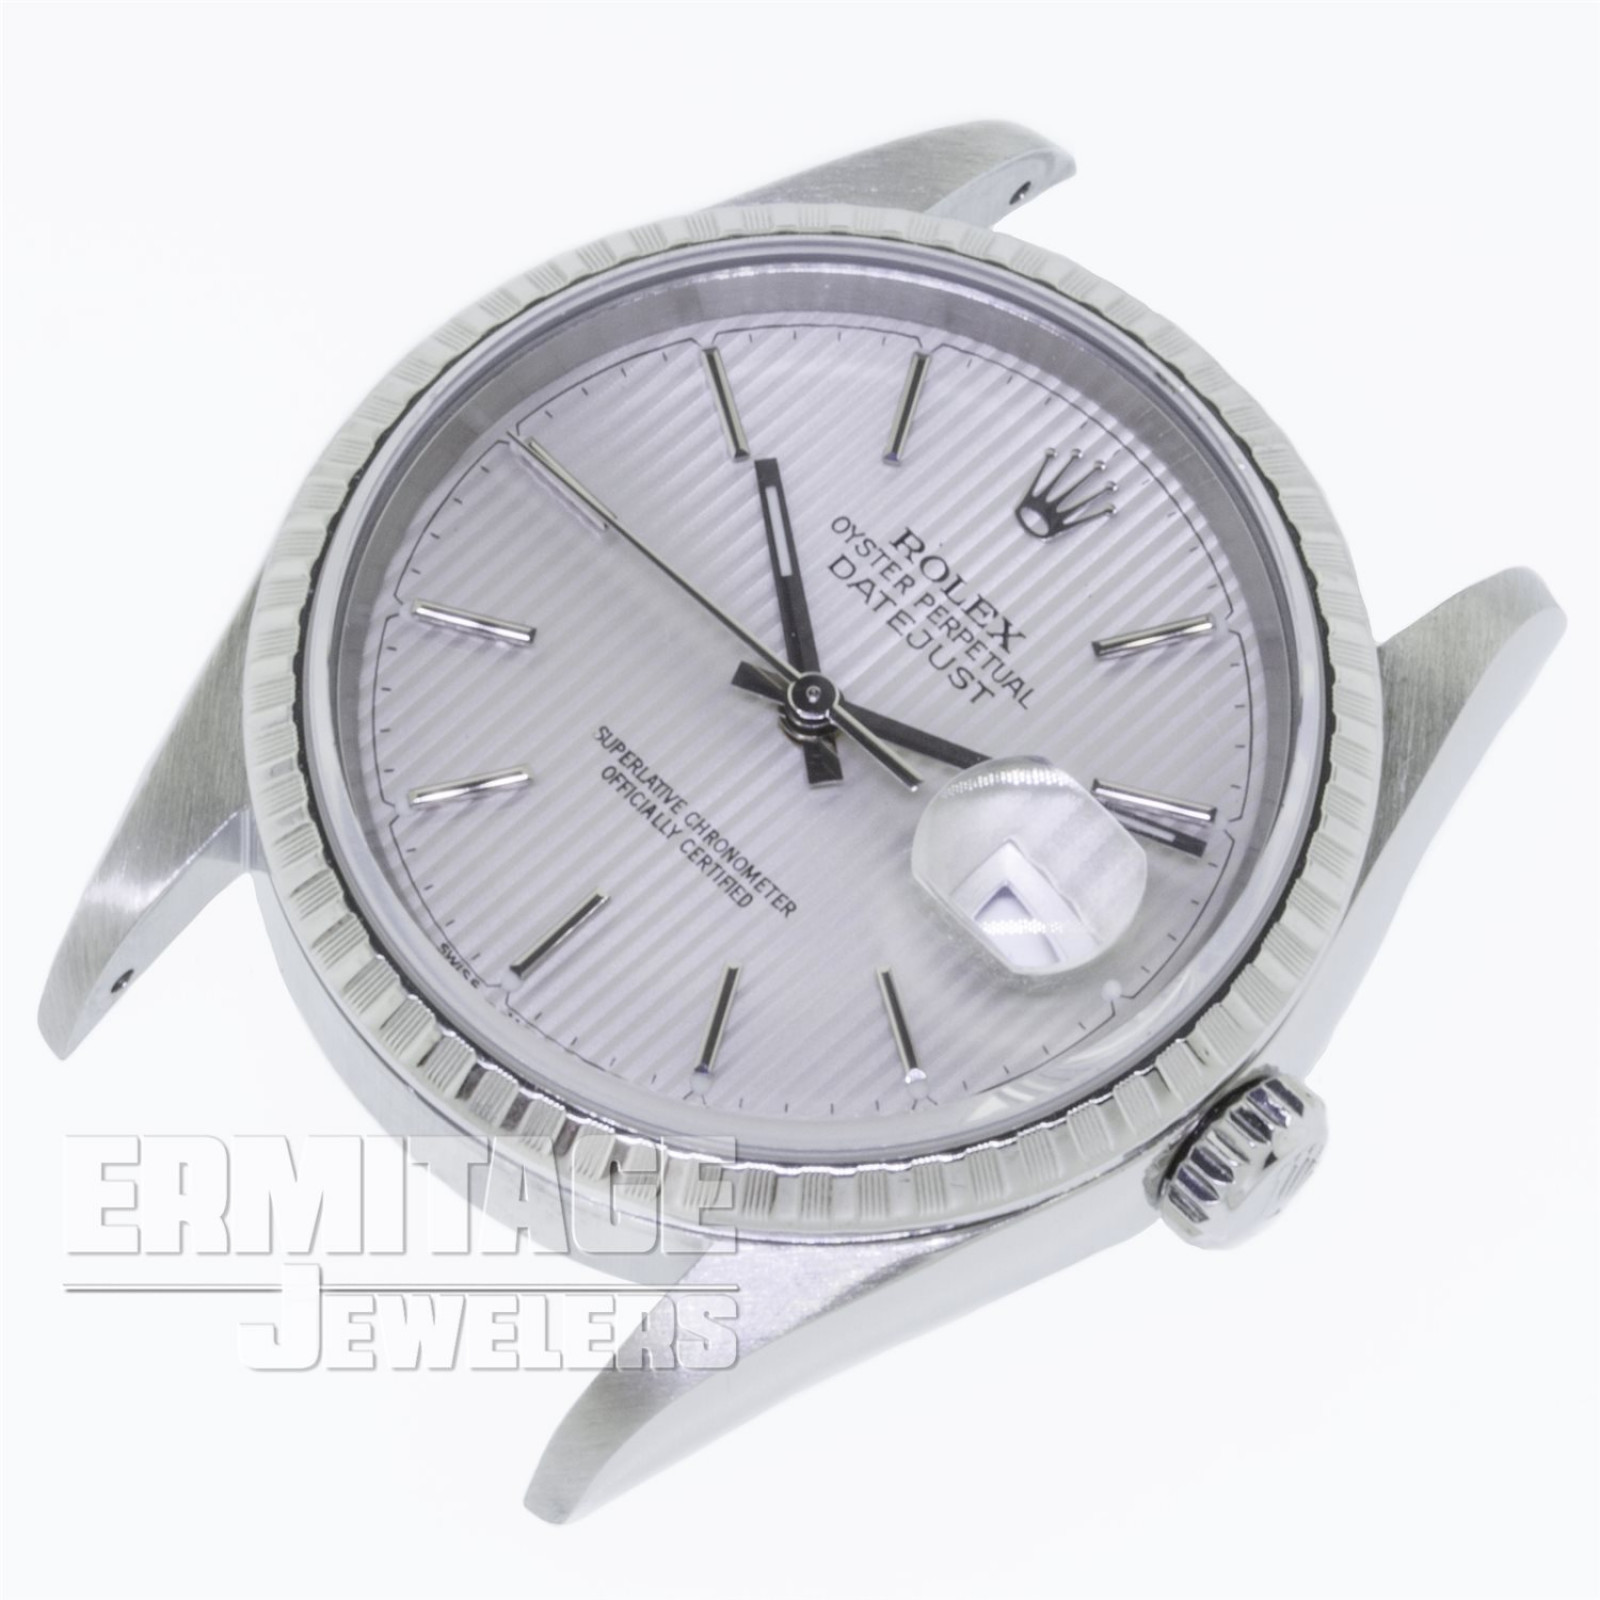 36 mm Rolex Datejust 16220 Steel on Jubilee with Silver Dial